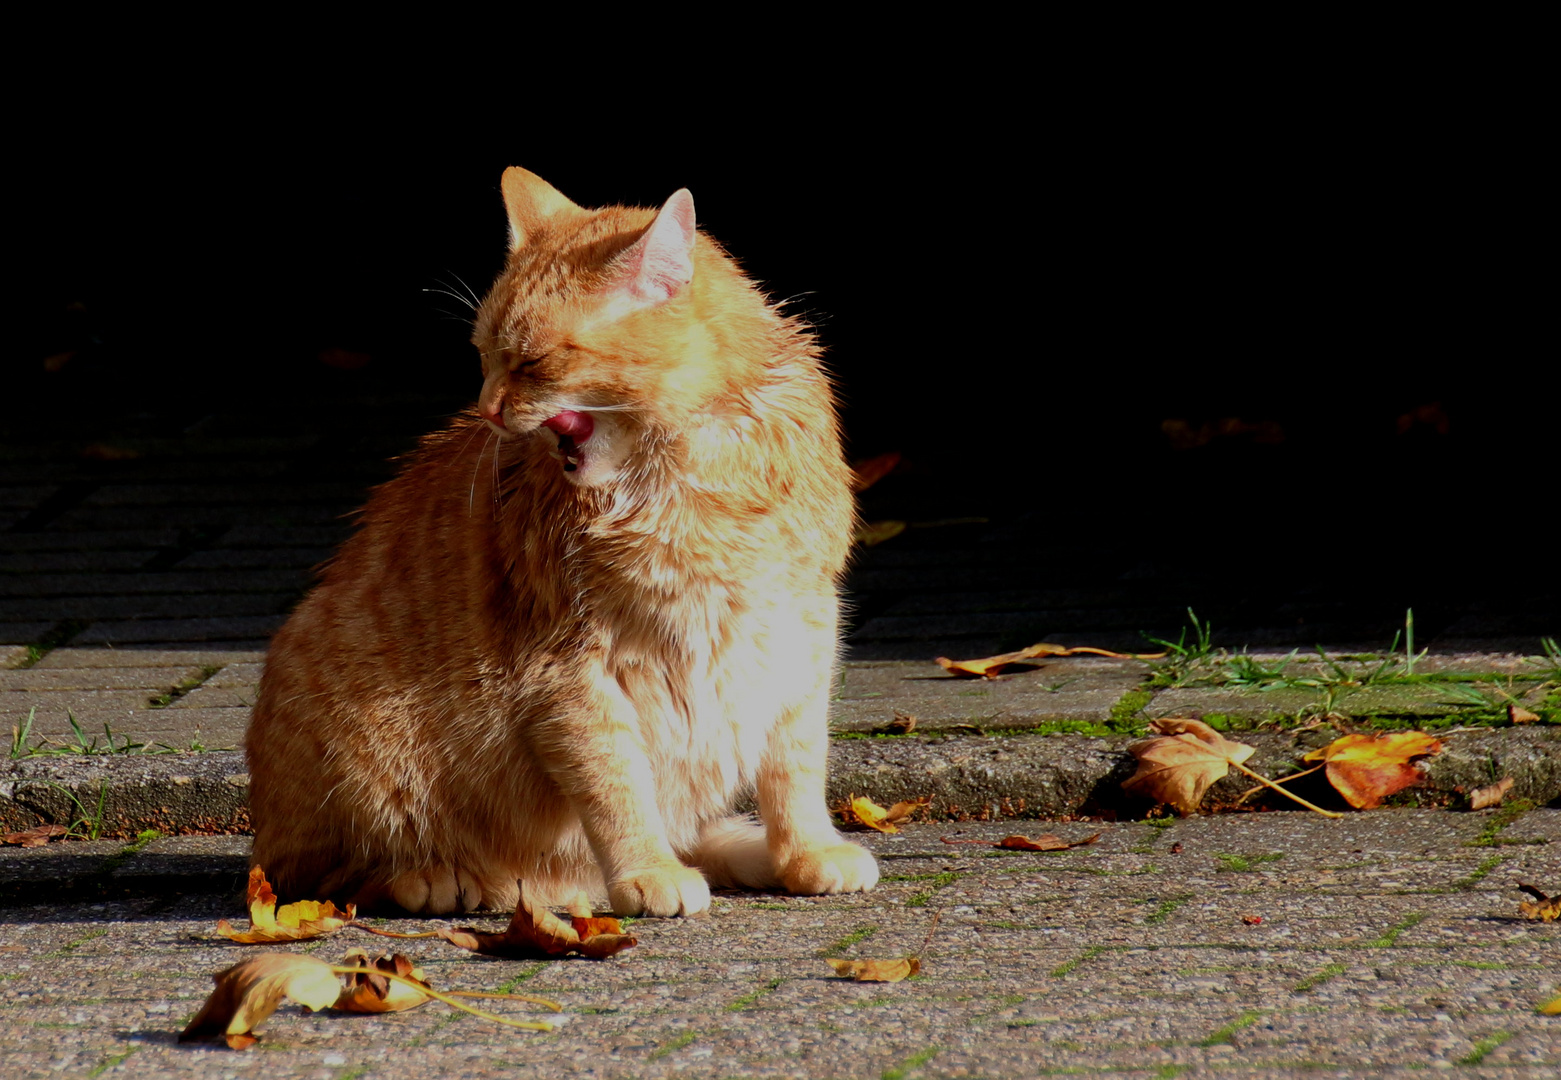 Herbstkater